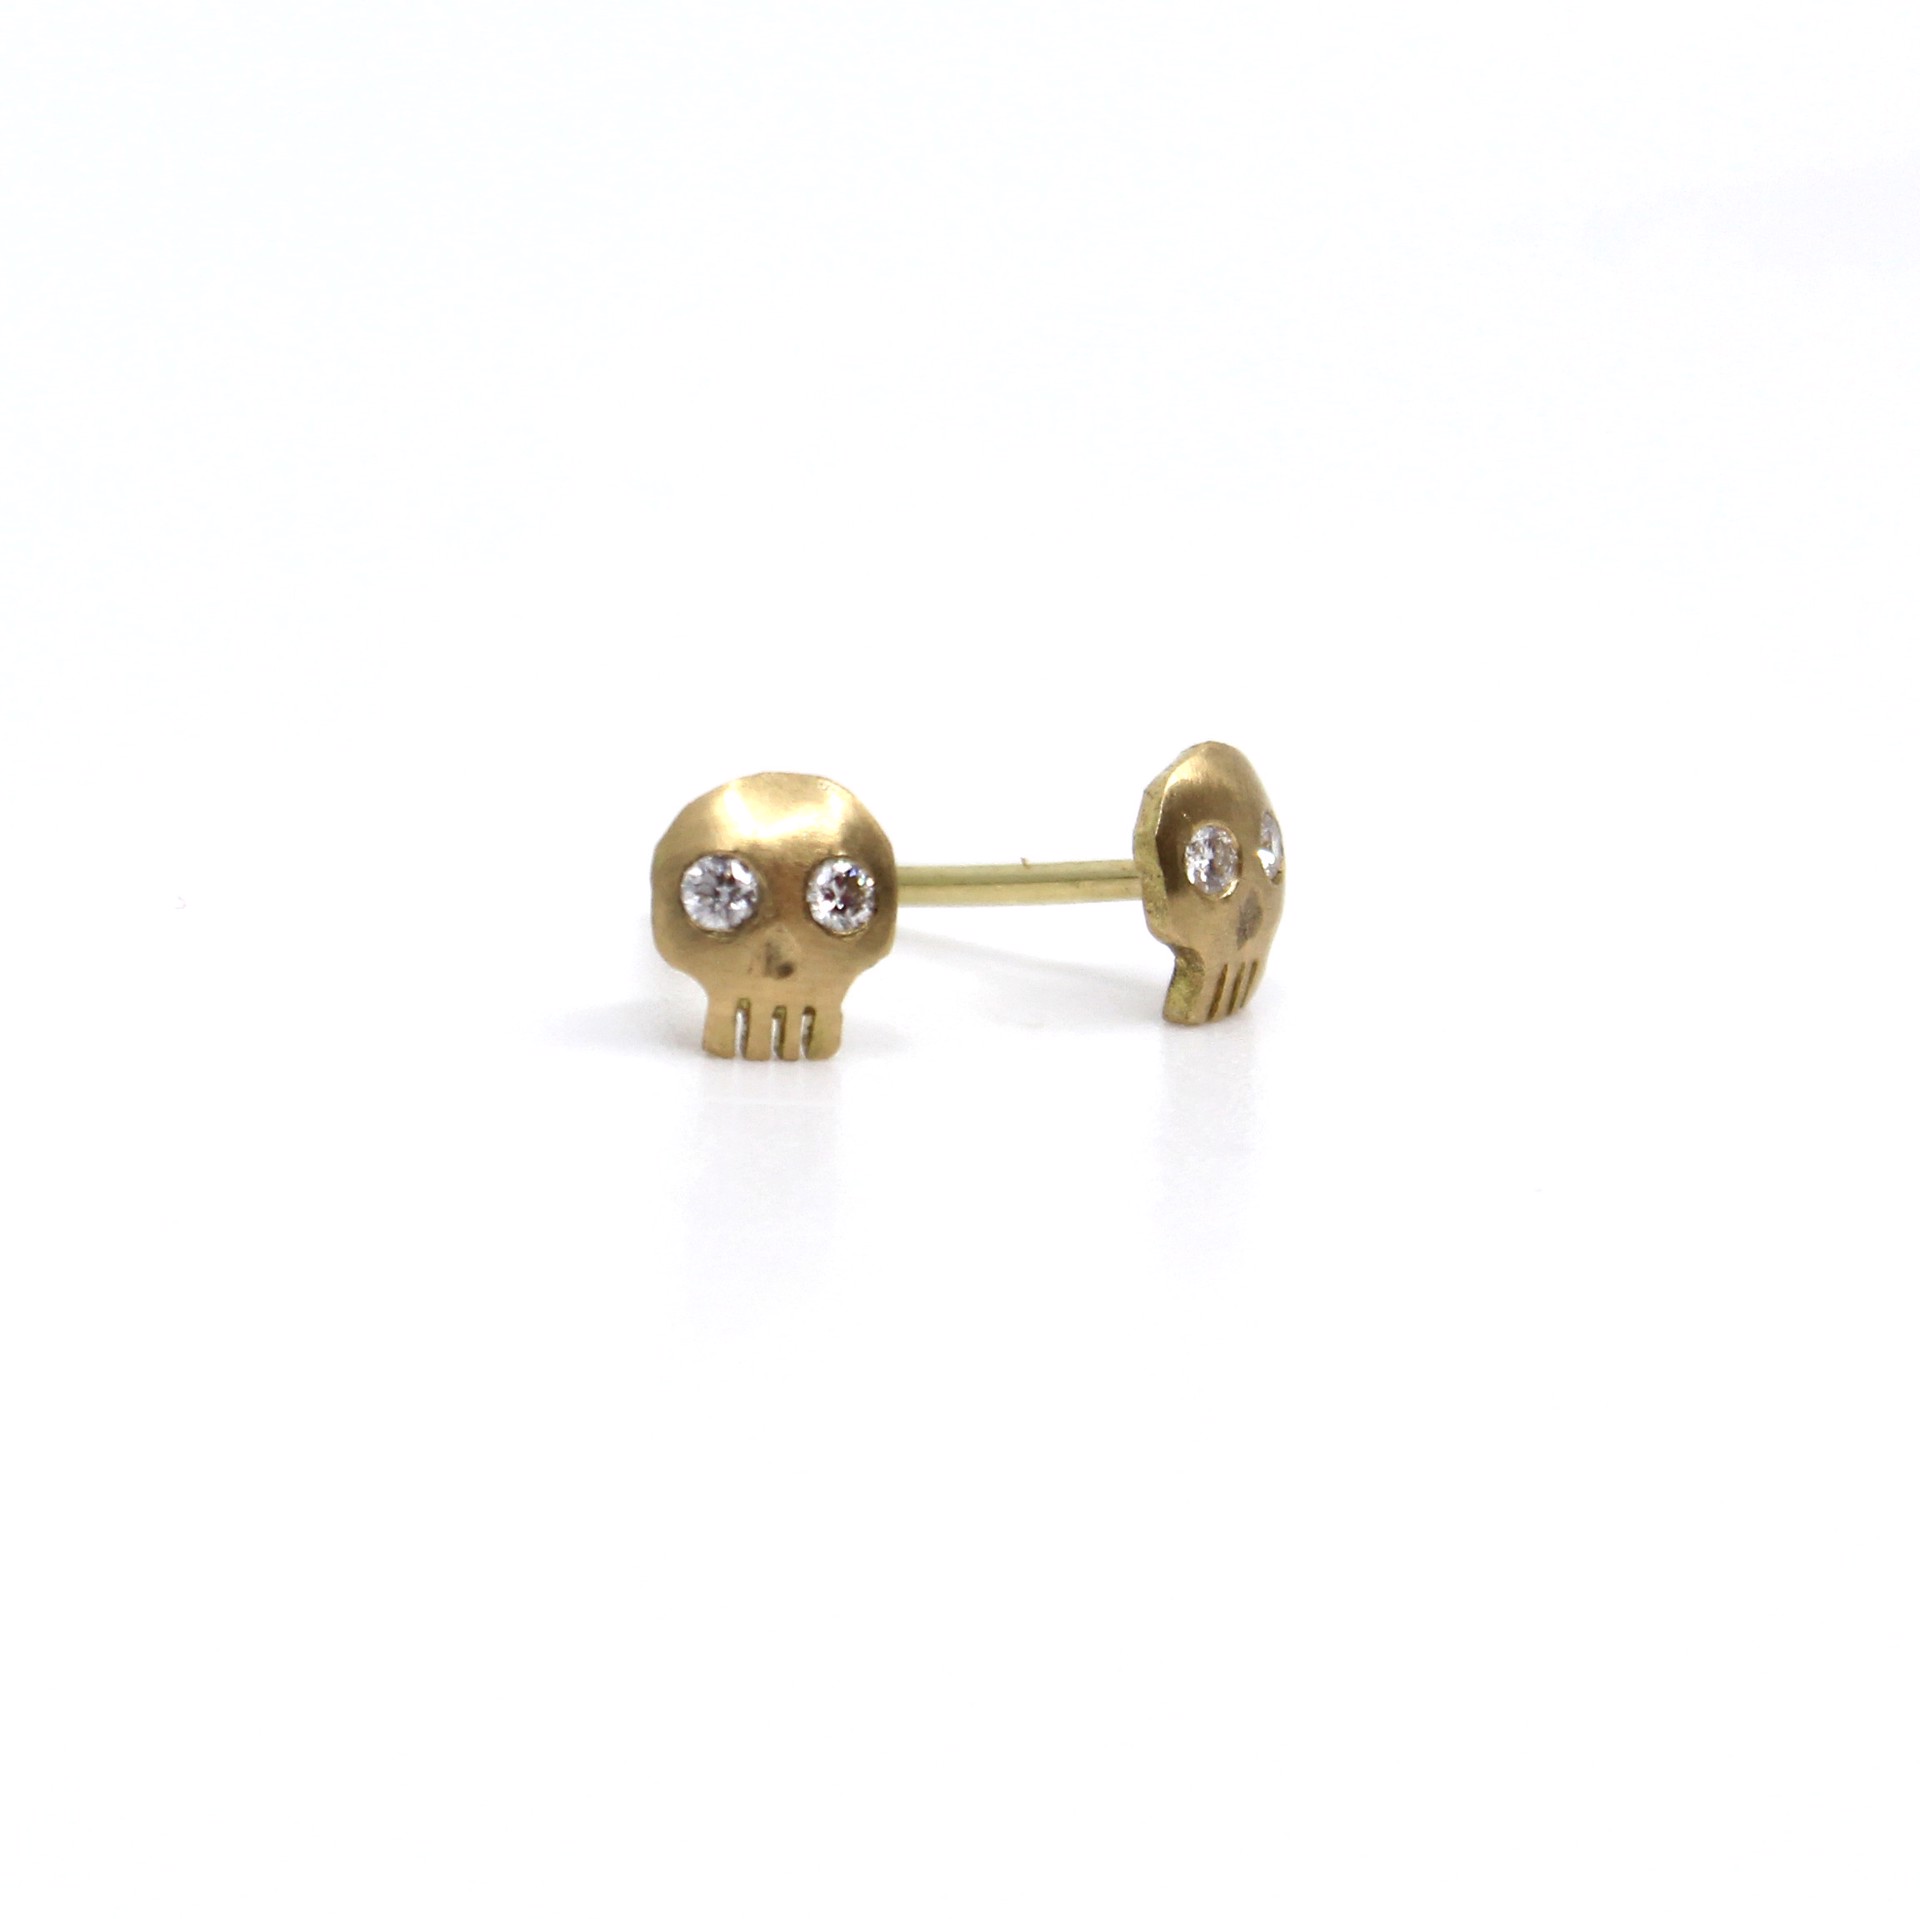 Skull Studs with Diamonds by Susan Elnora